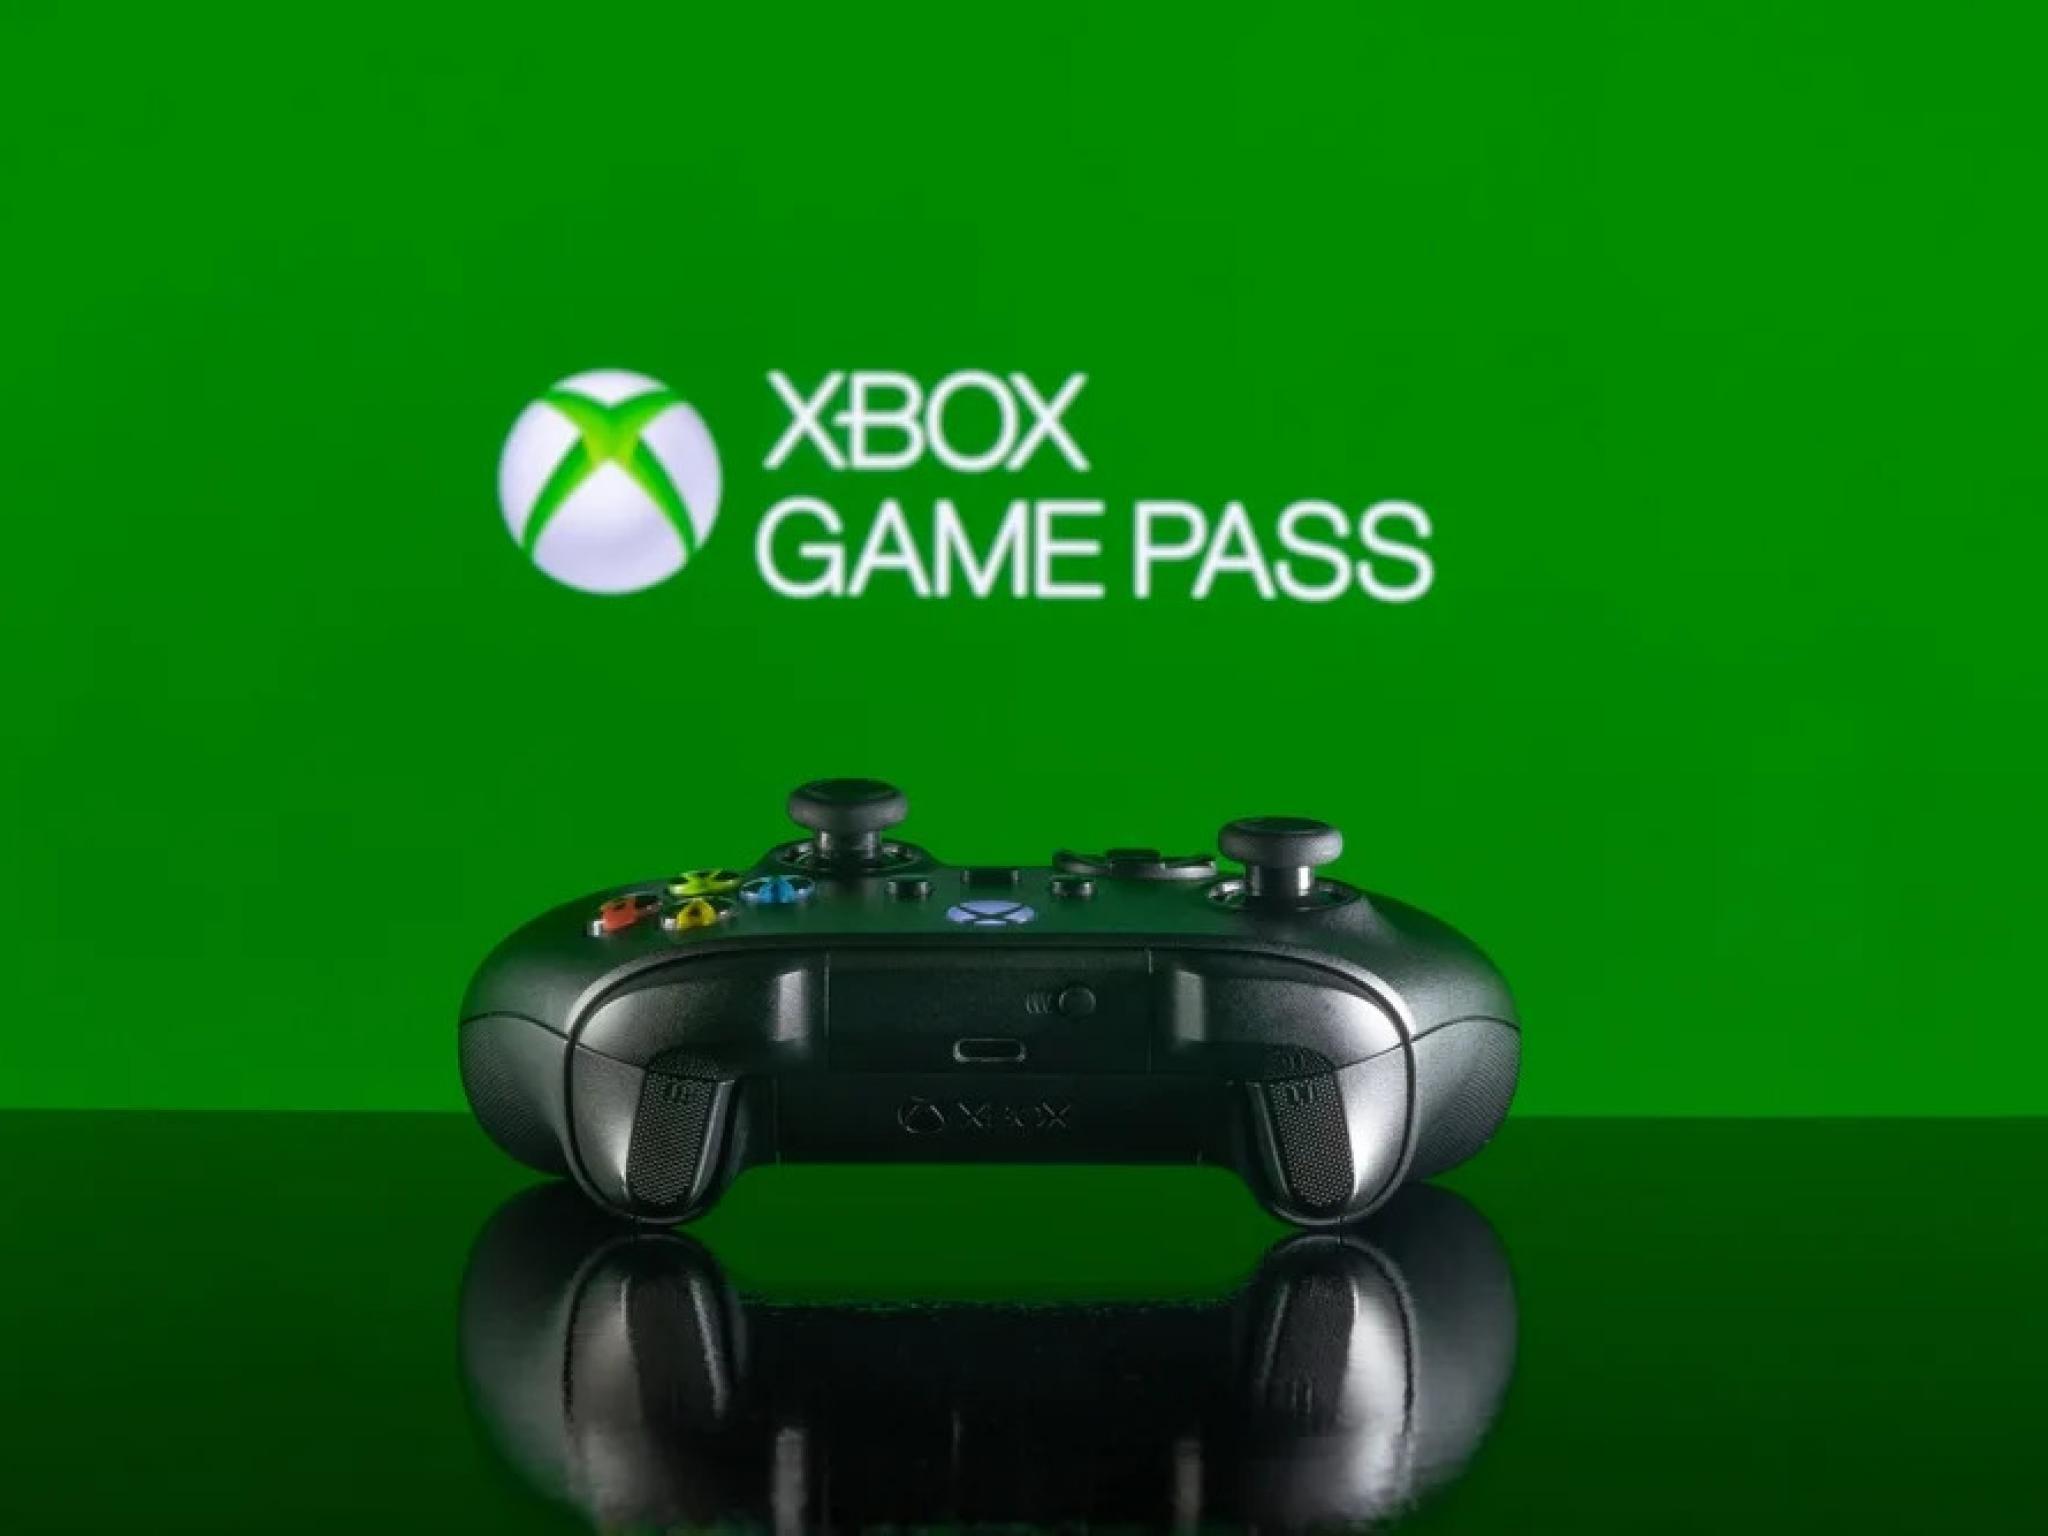  xbox-game-pass-ultimate-sets-new-price-at-1999-day-one-releases-exclusive-to-premium-tier 